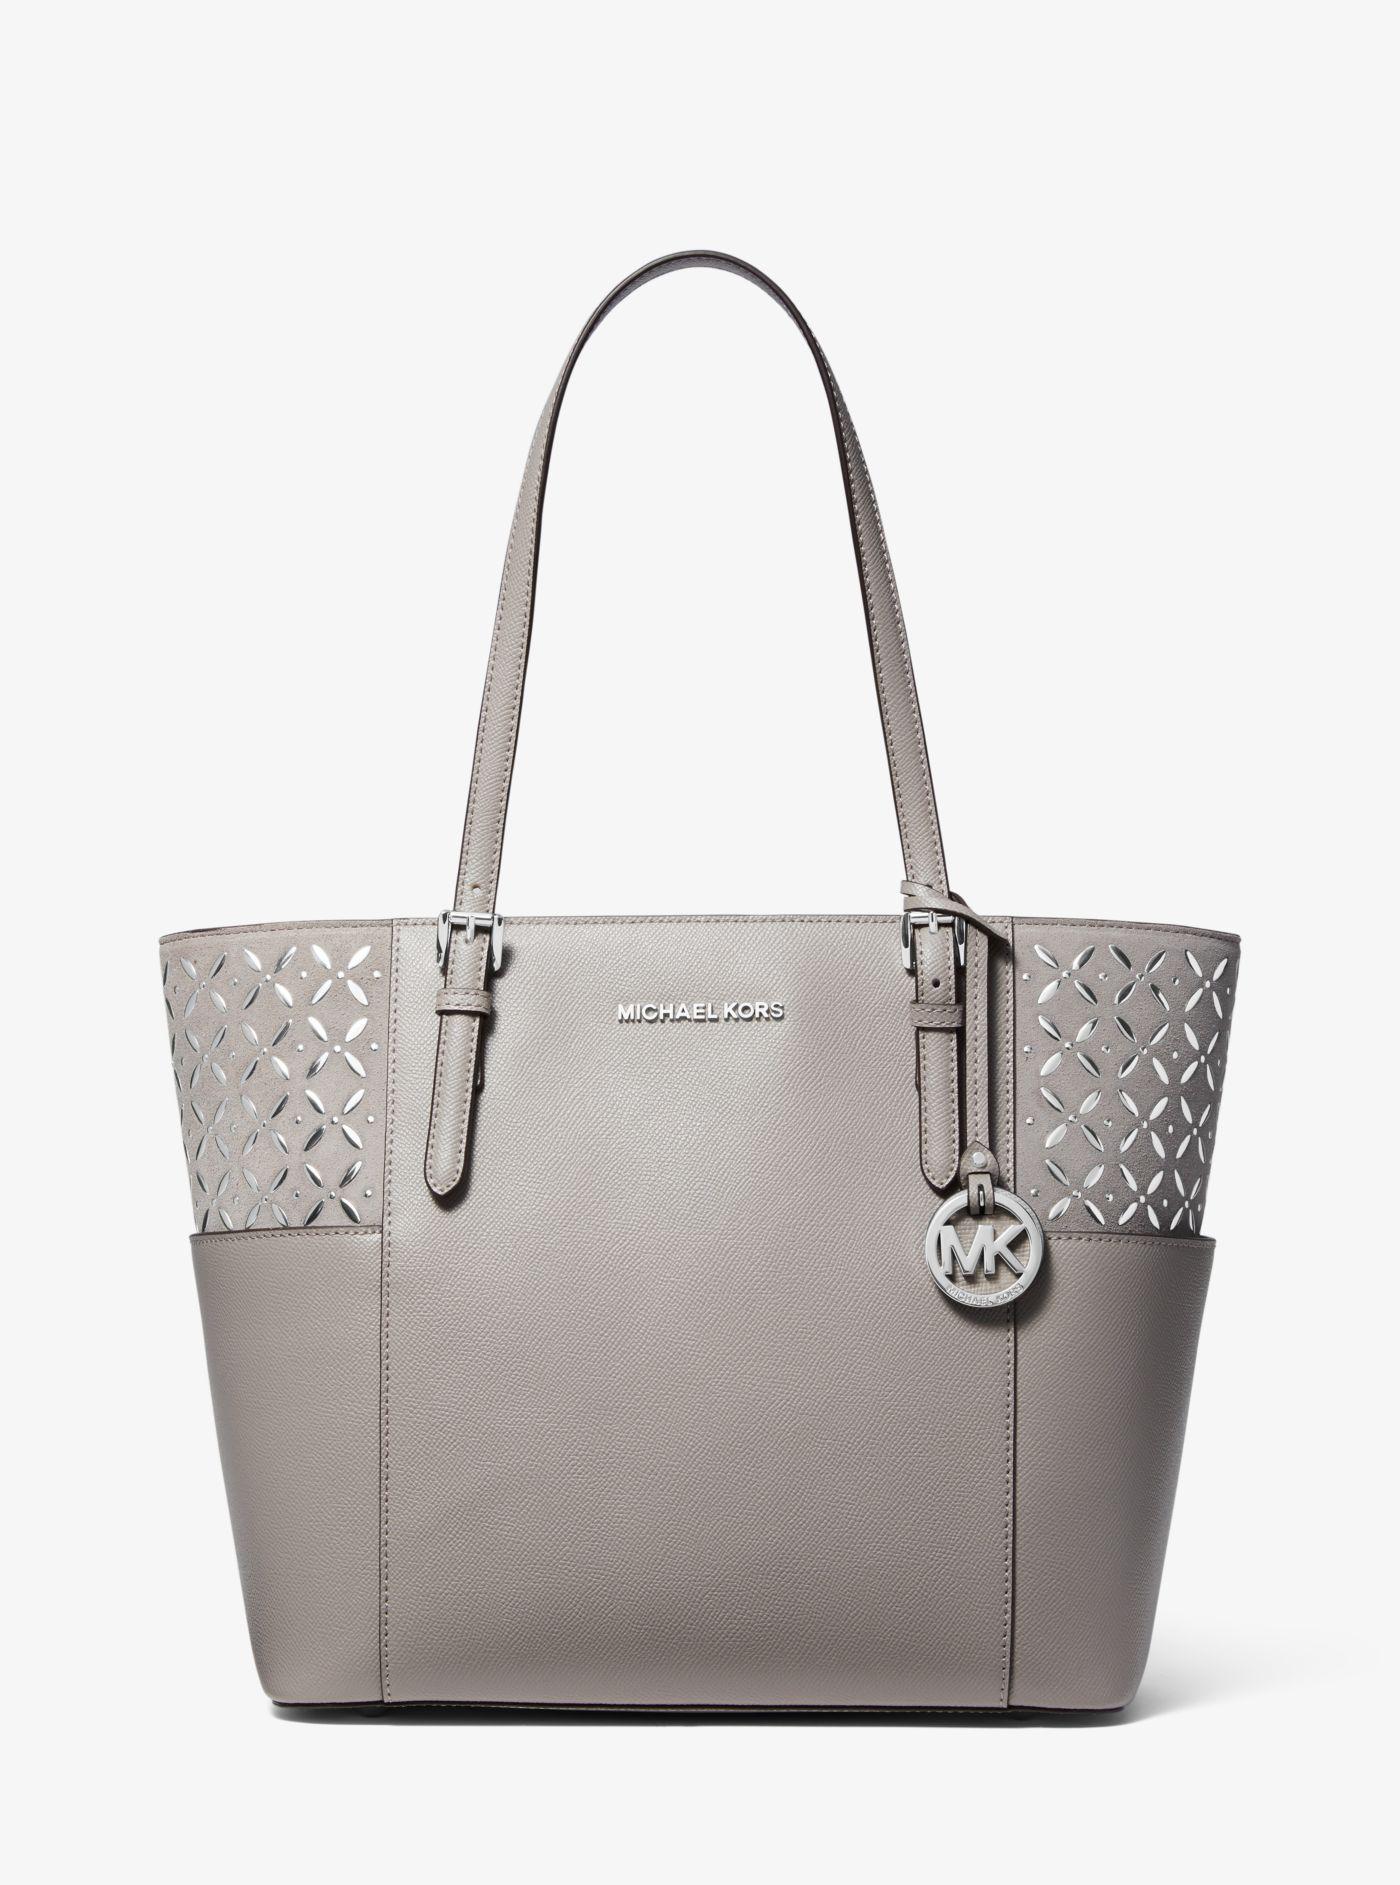 Michael Kors Suede Jet Set Large Embellished Leather Tote Bag in Pearl Grey  (Gray) - Lyst